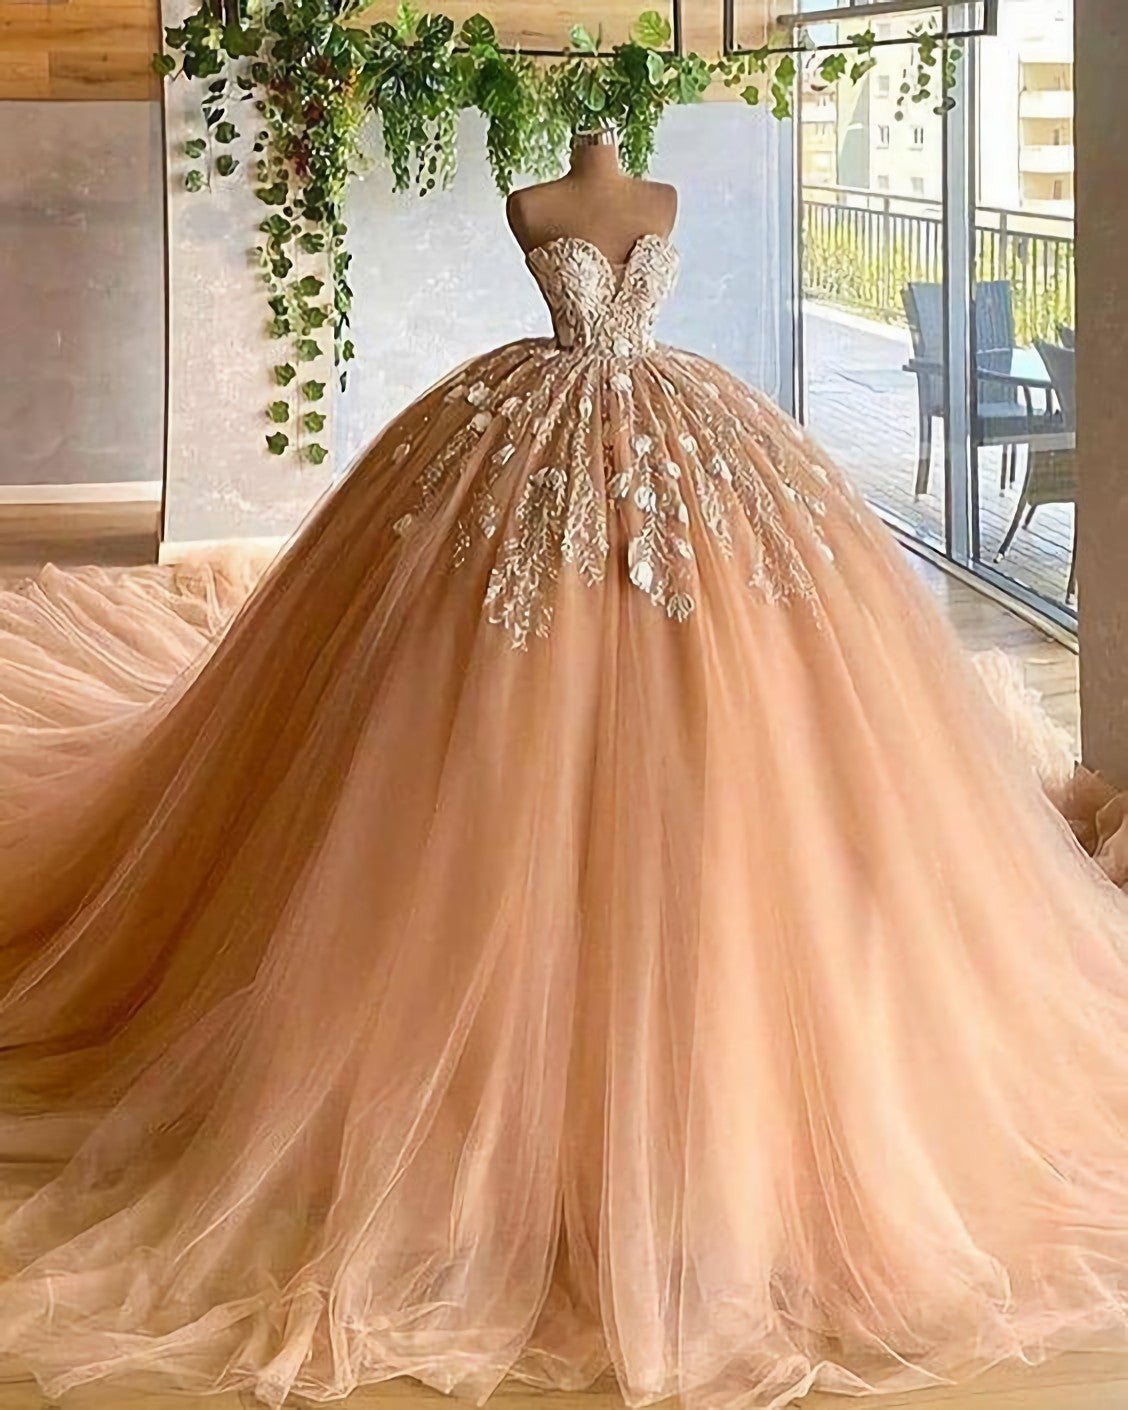 Applique Tulle Pleated Sweetheart Champagne Ball Gown Evening Dress